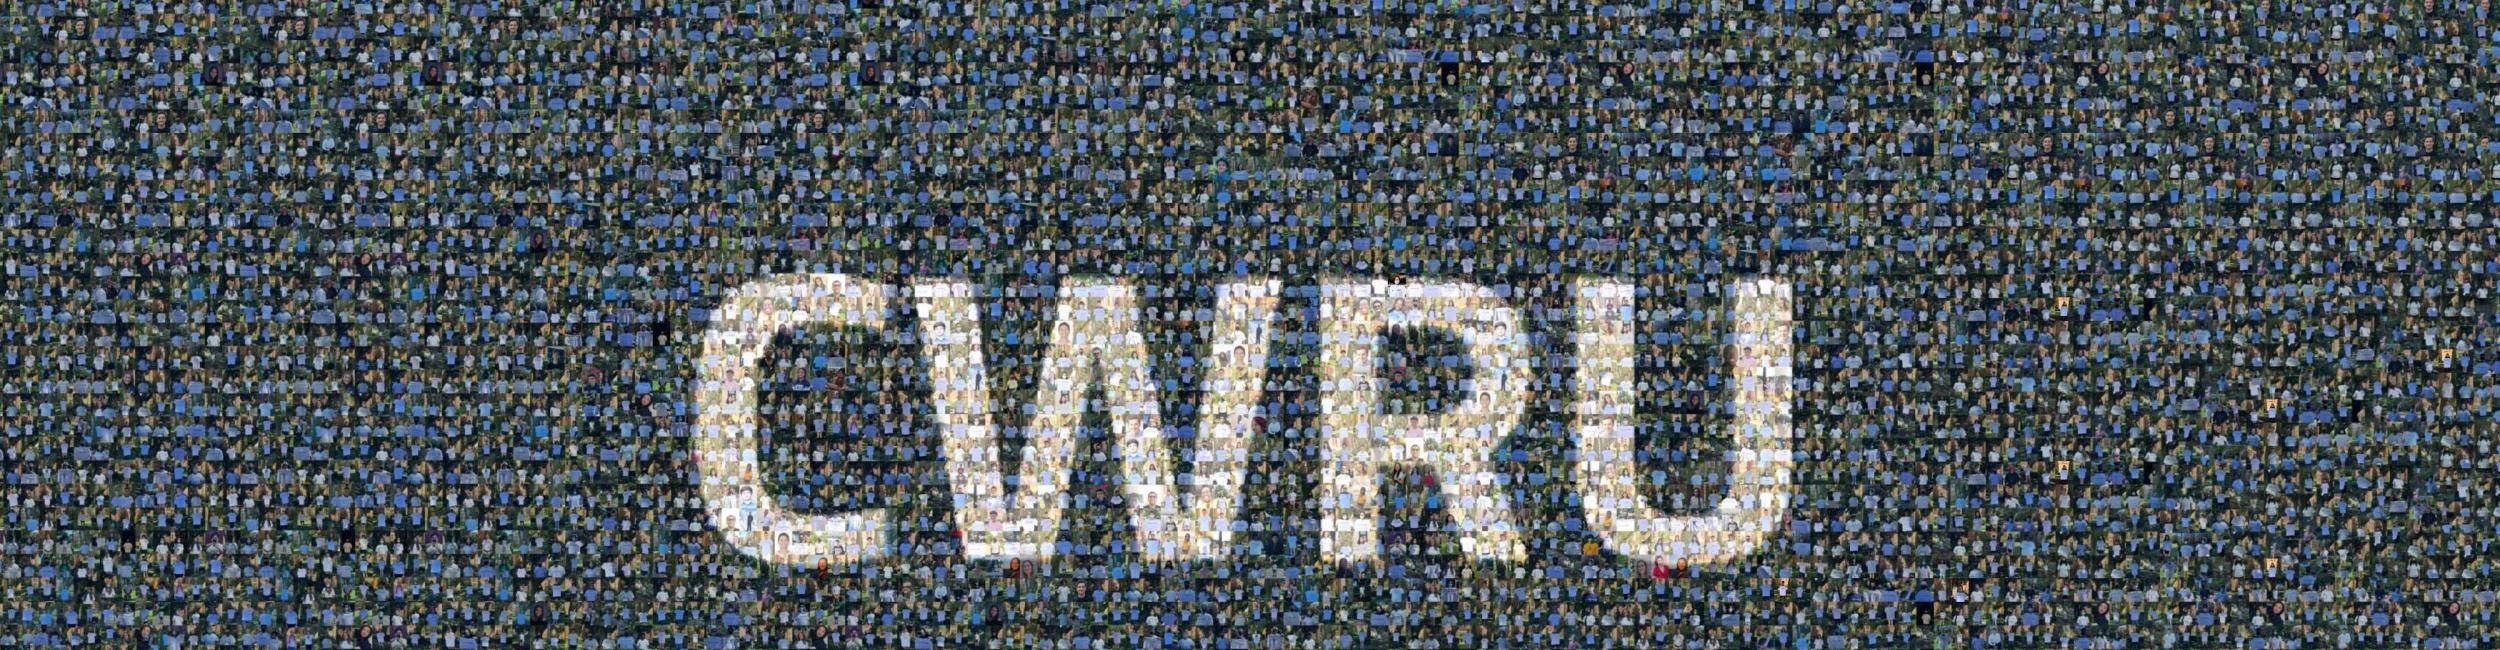 A mosaic of student photos spells out the letters C-W-R-U